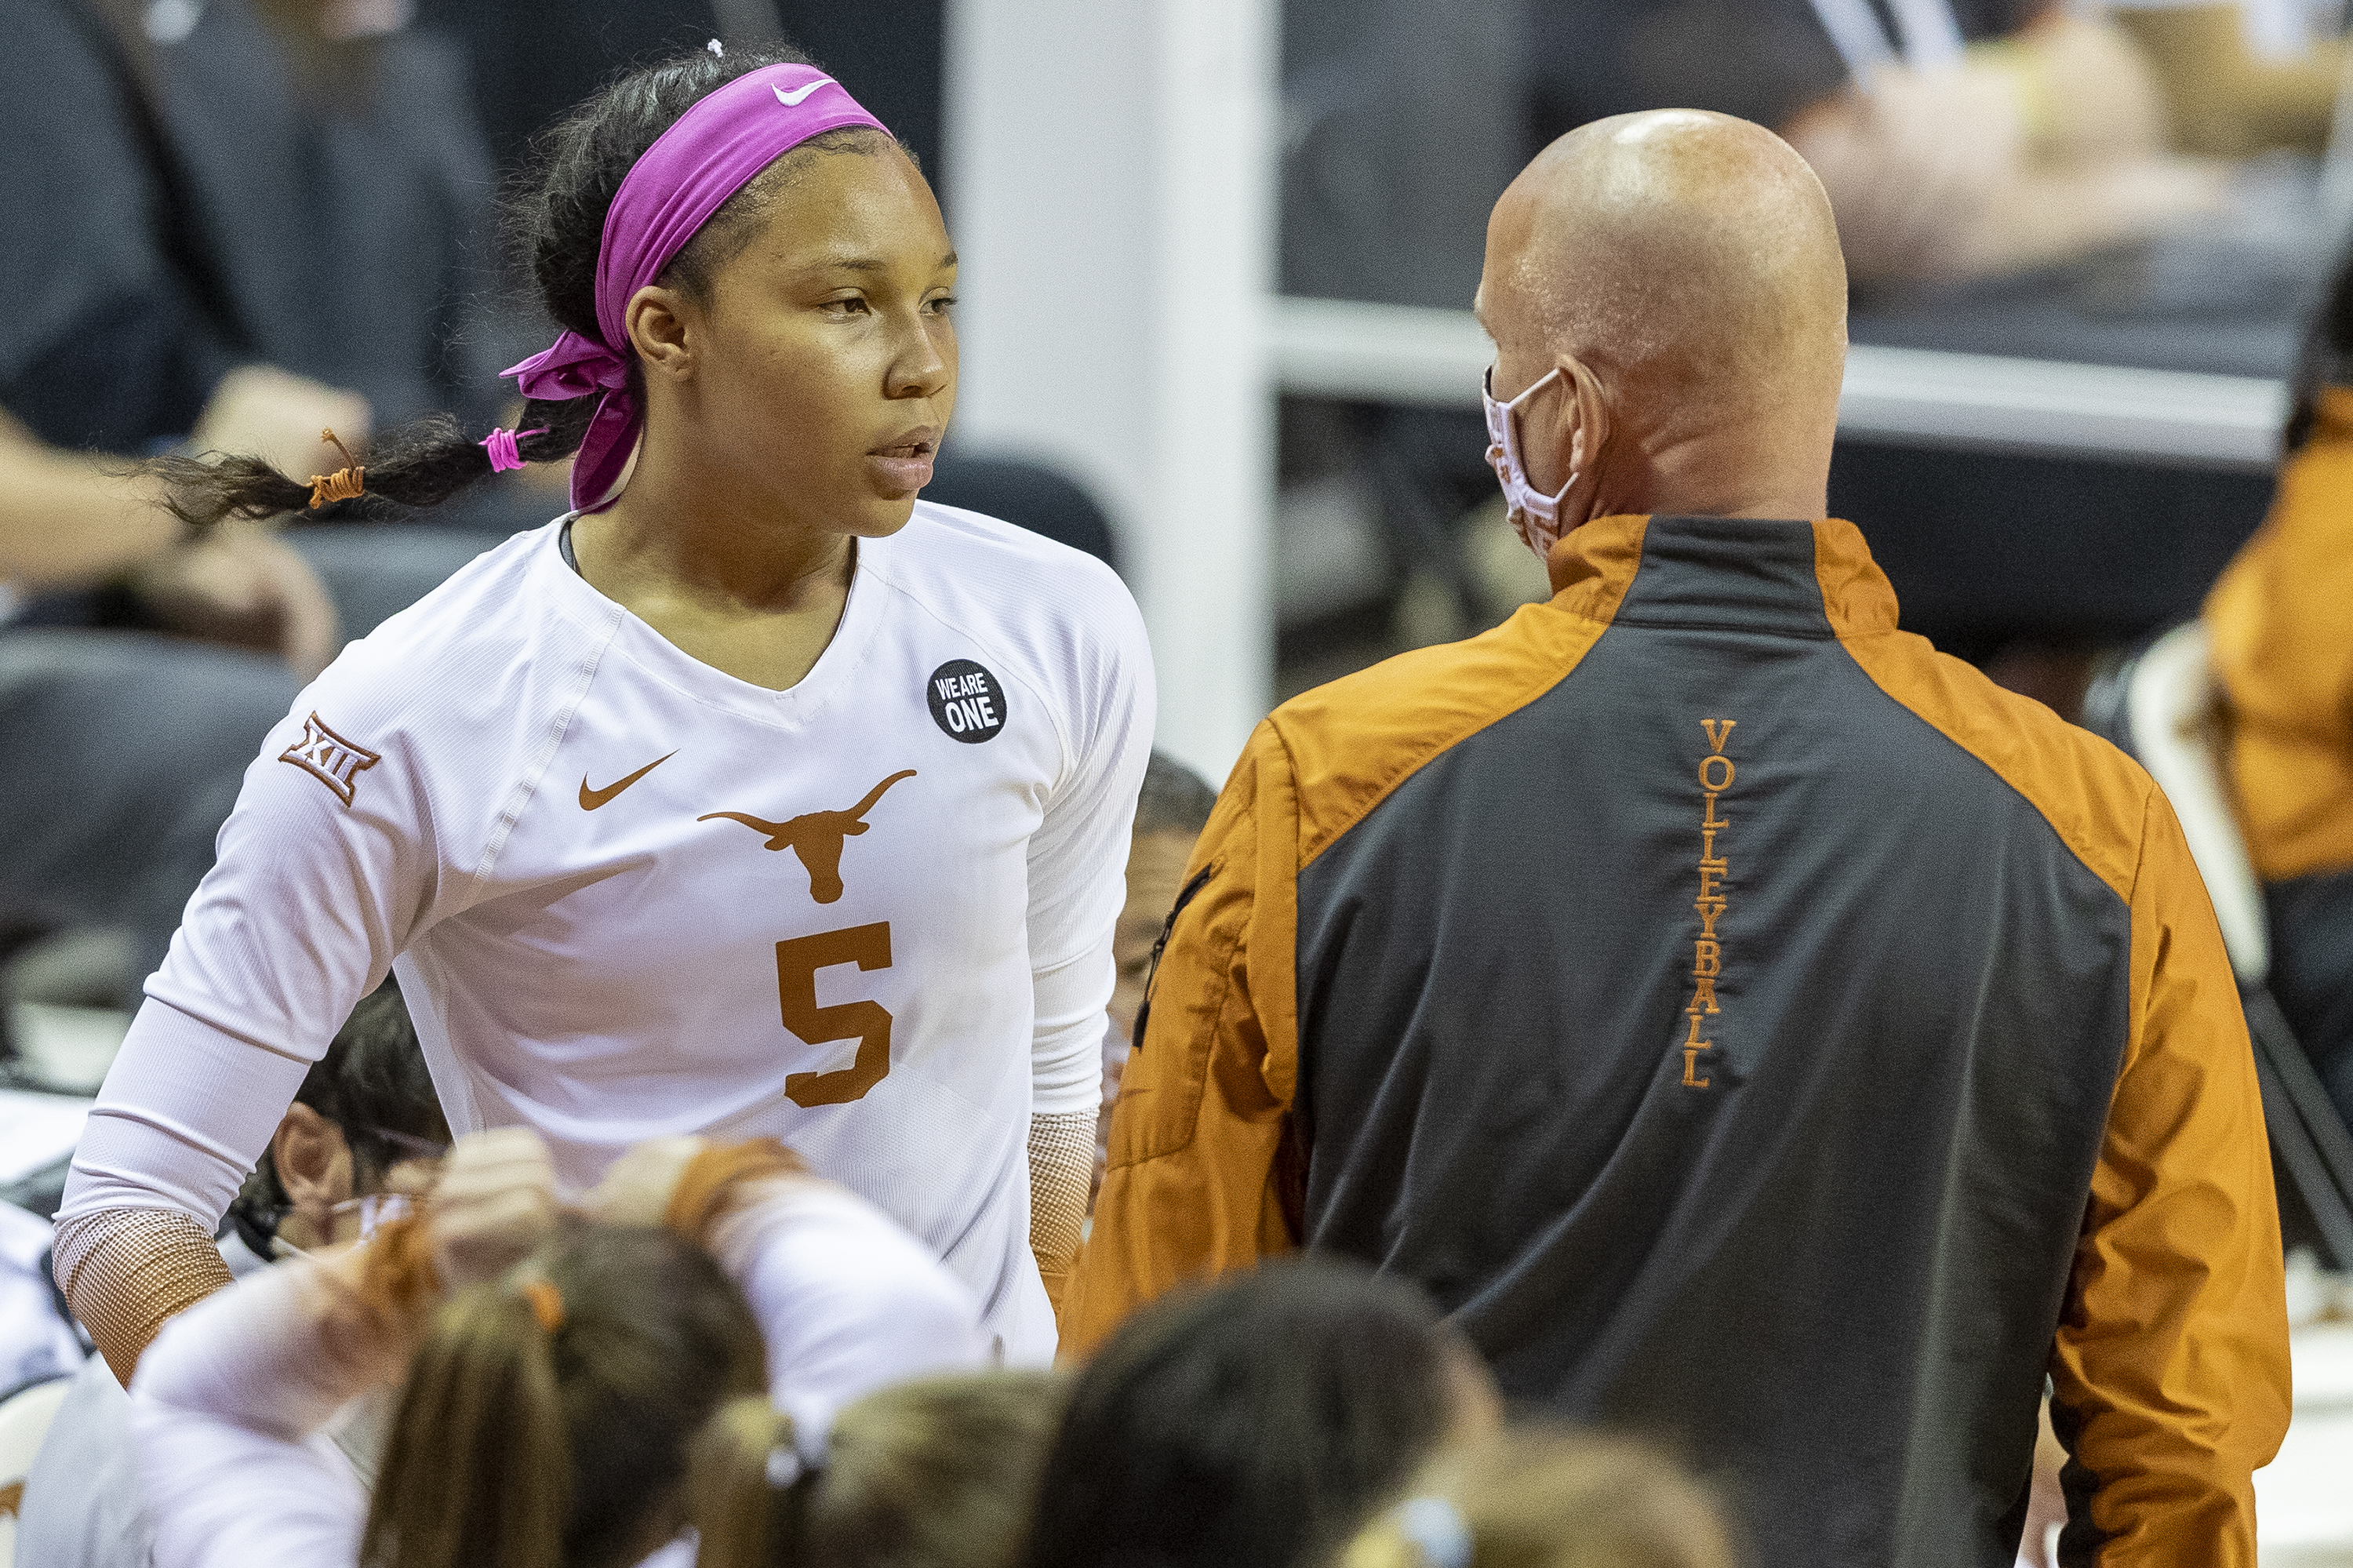 UT Volleyball addresses how it addressed "The Eyes of Texas"